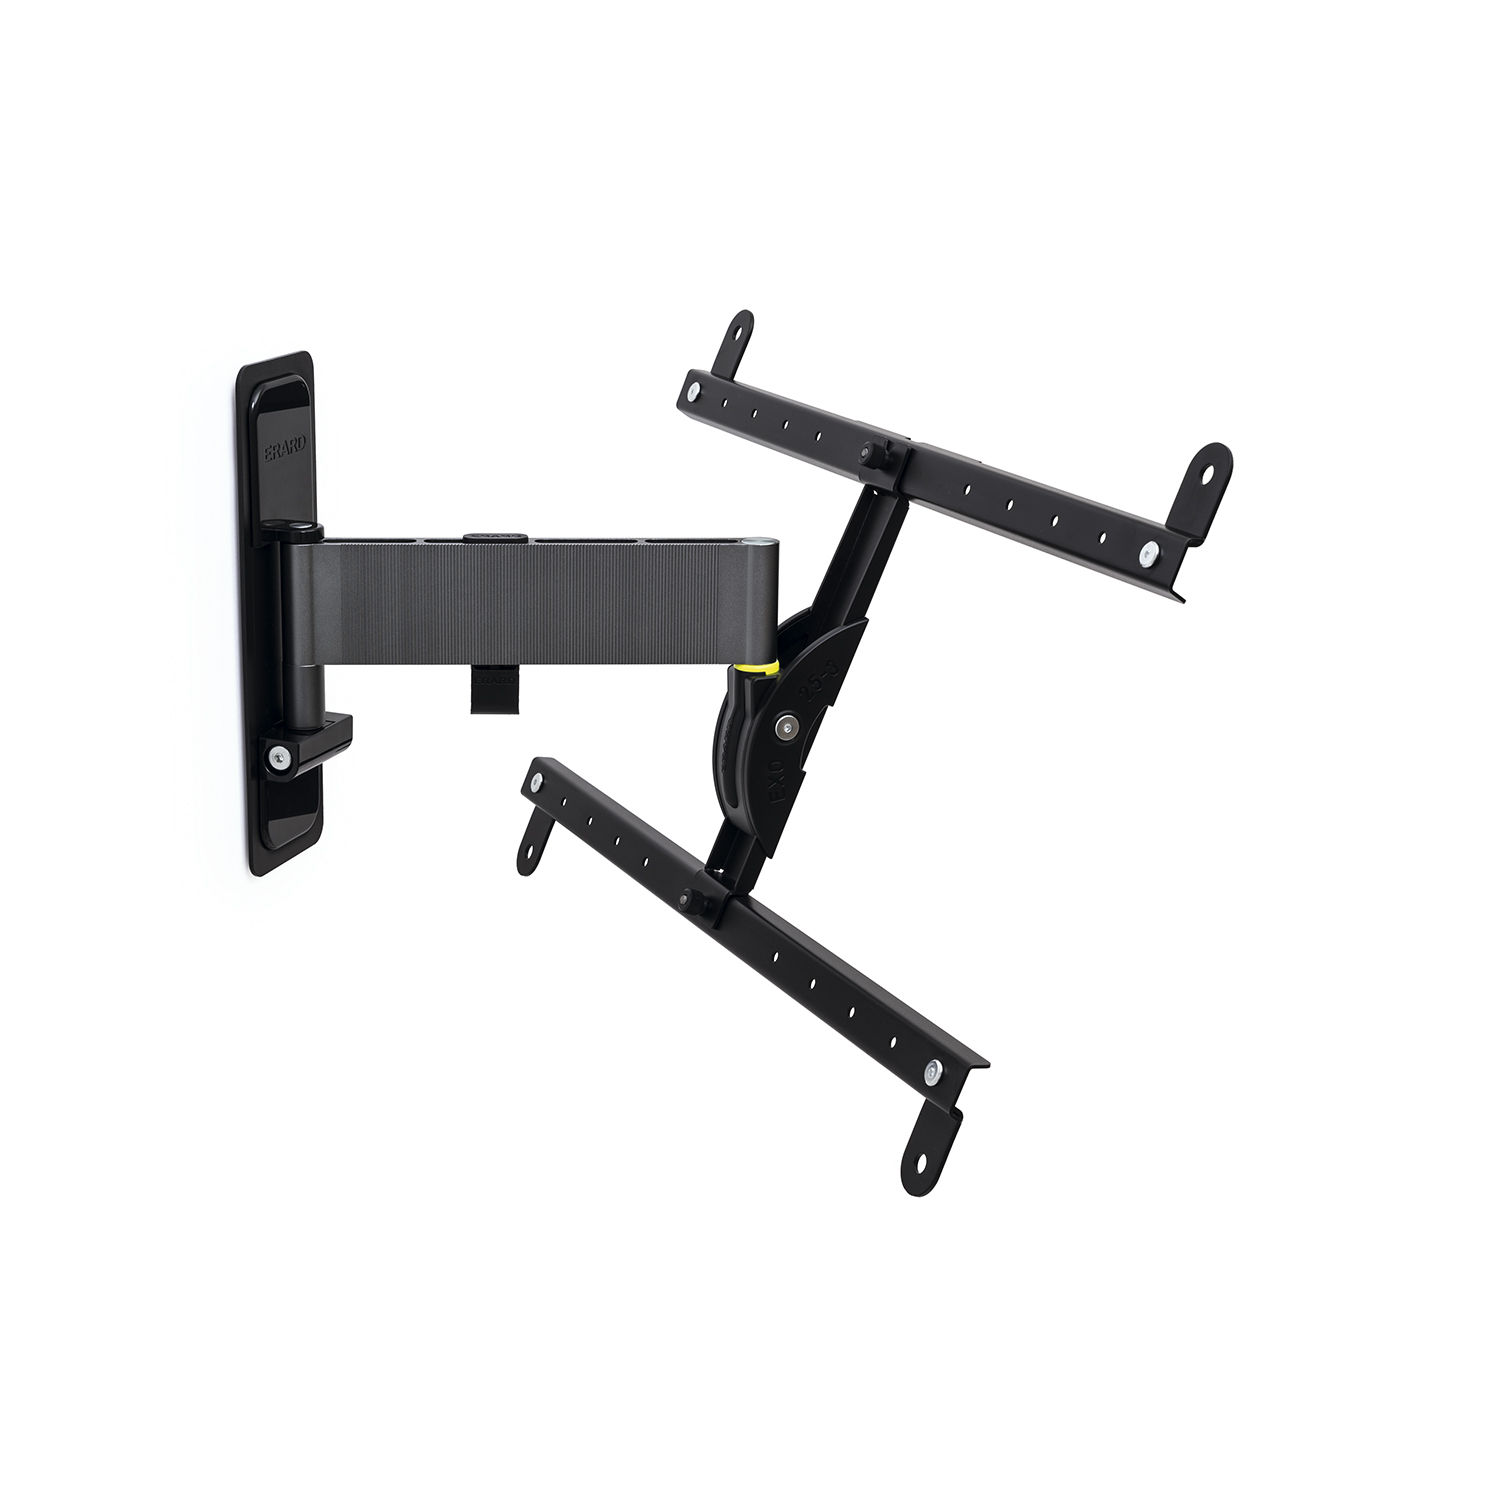 EXO 600TW2 - support mural inclinable orientable